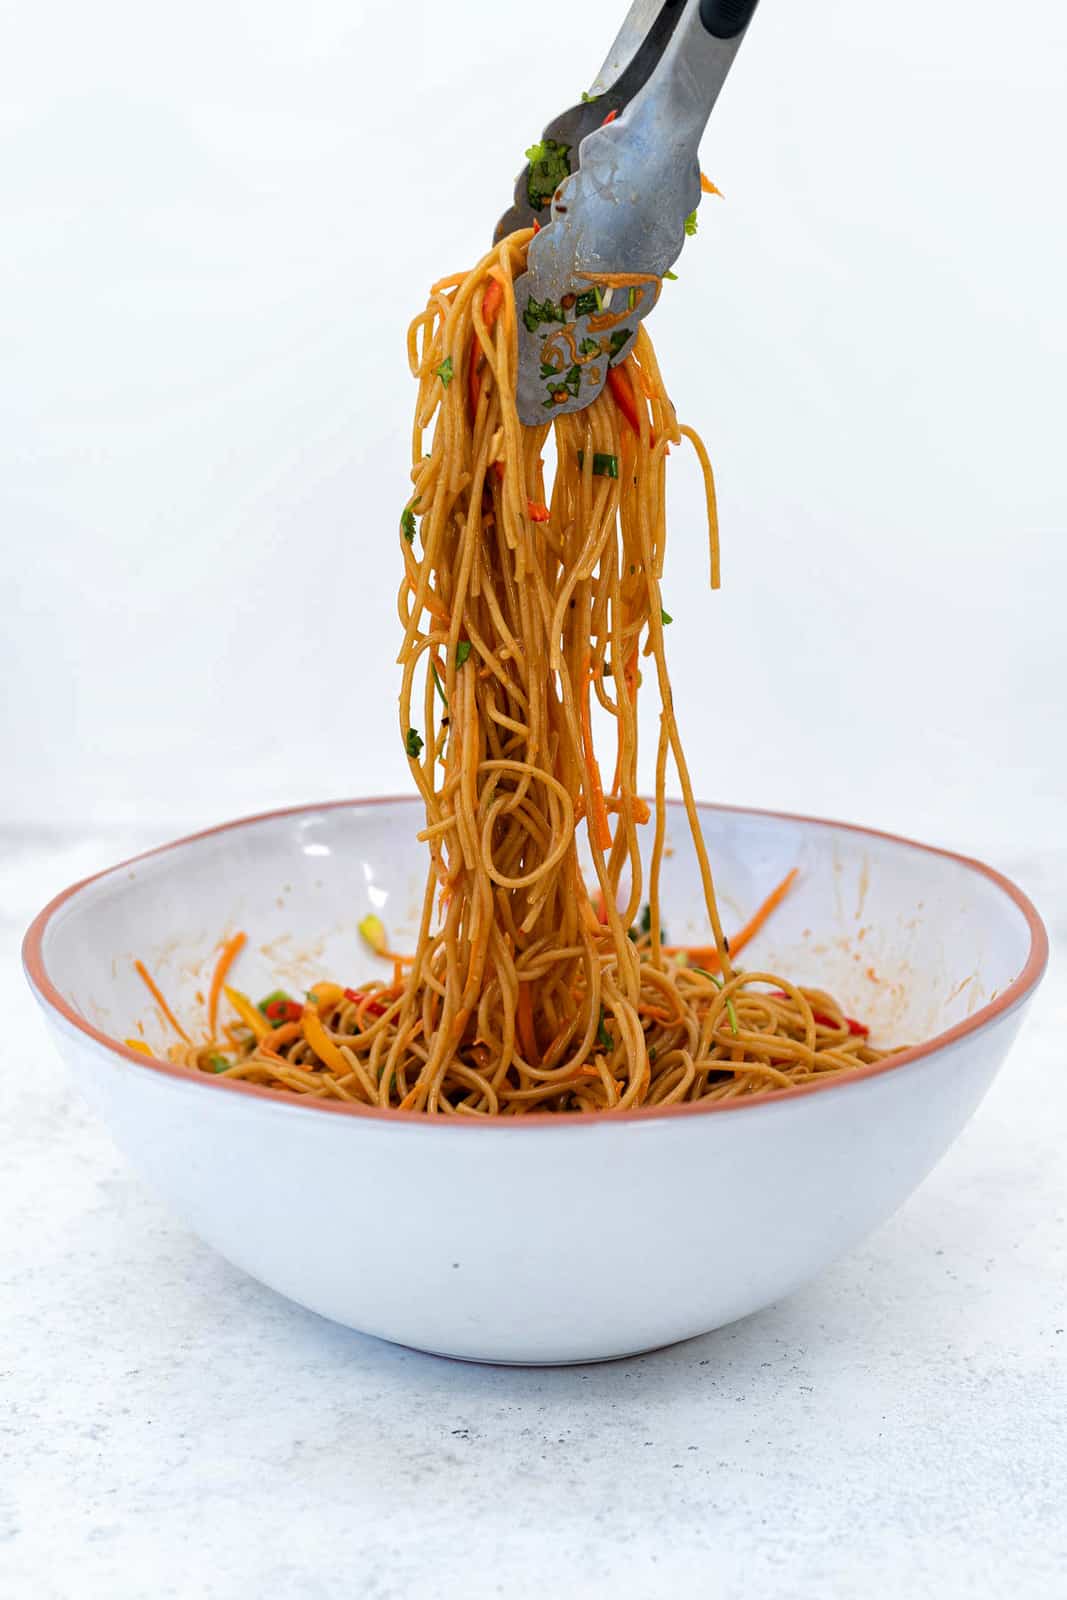 Tossing noodles with spicy peanut sauce and vegetables in a bowl